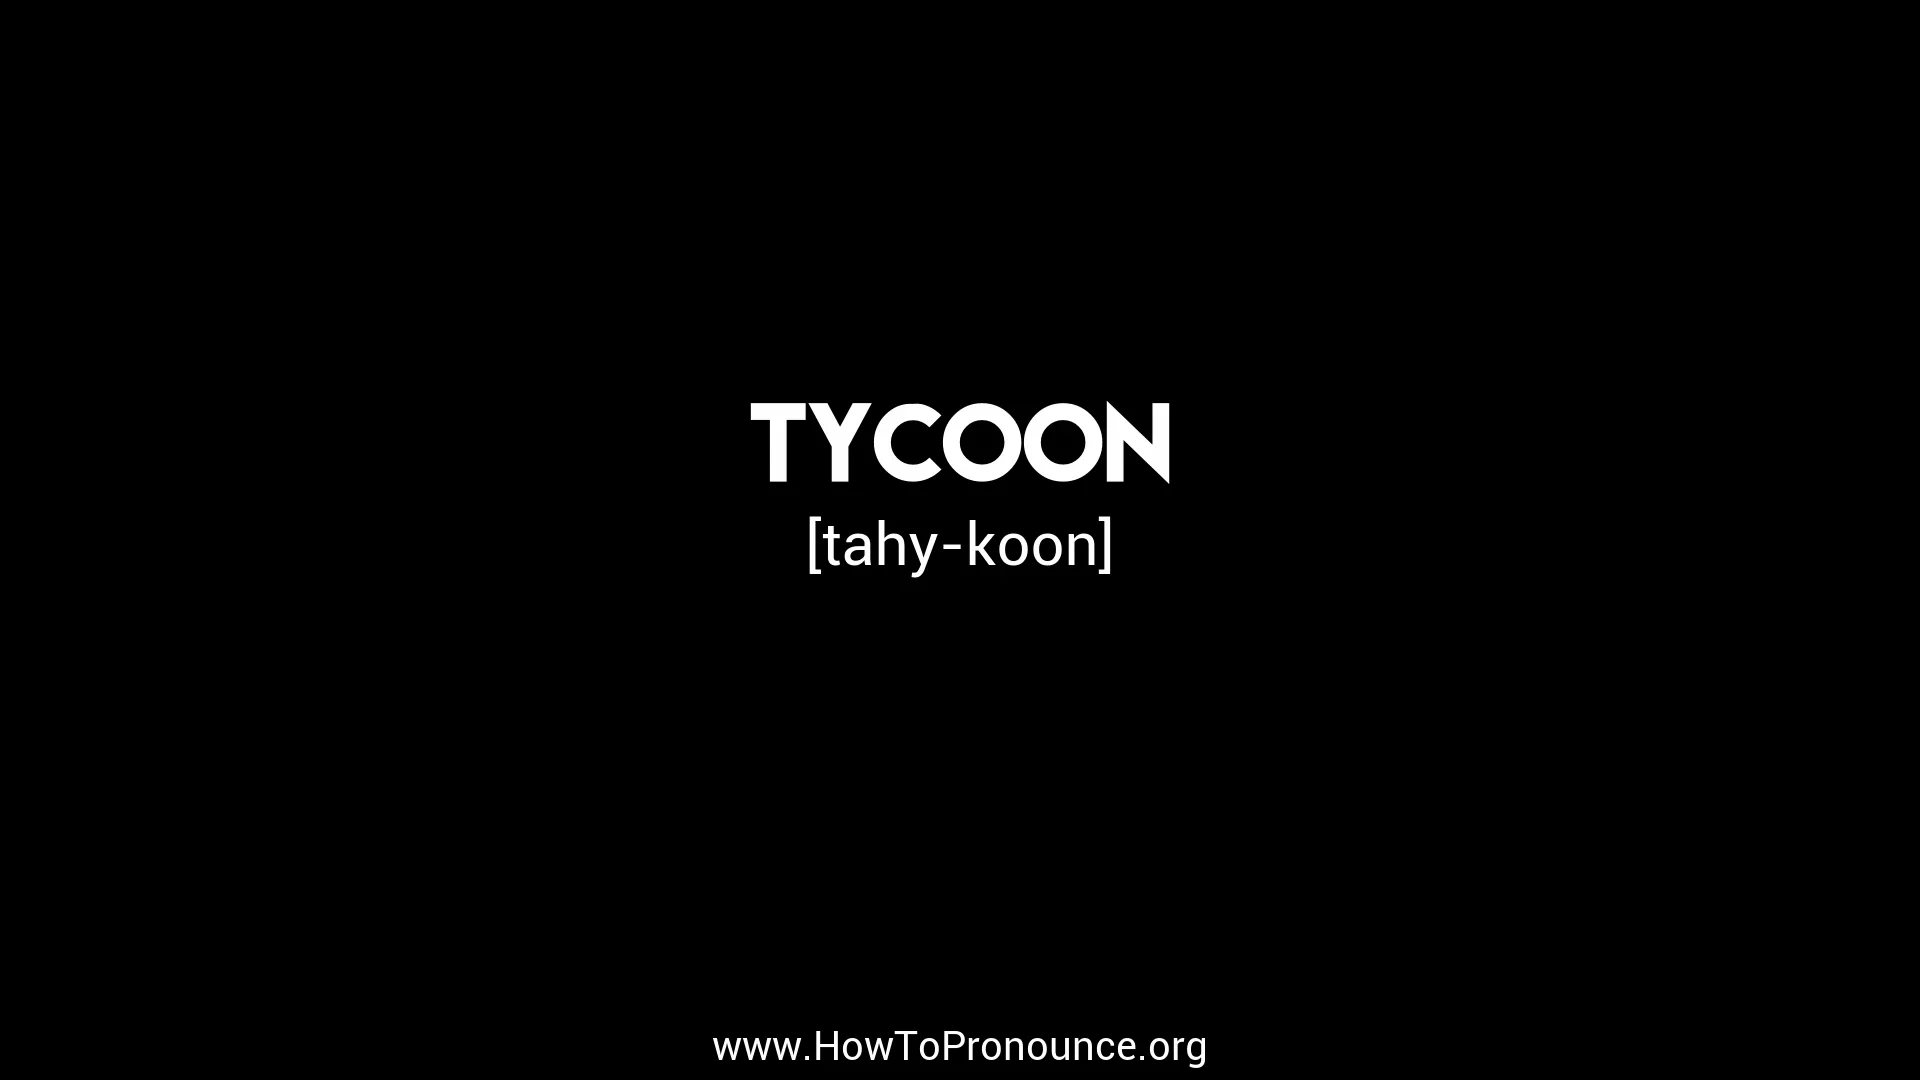 Tycoon Meaning, Pronunciation, Numerology and More